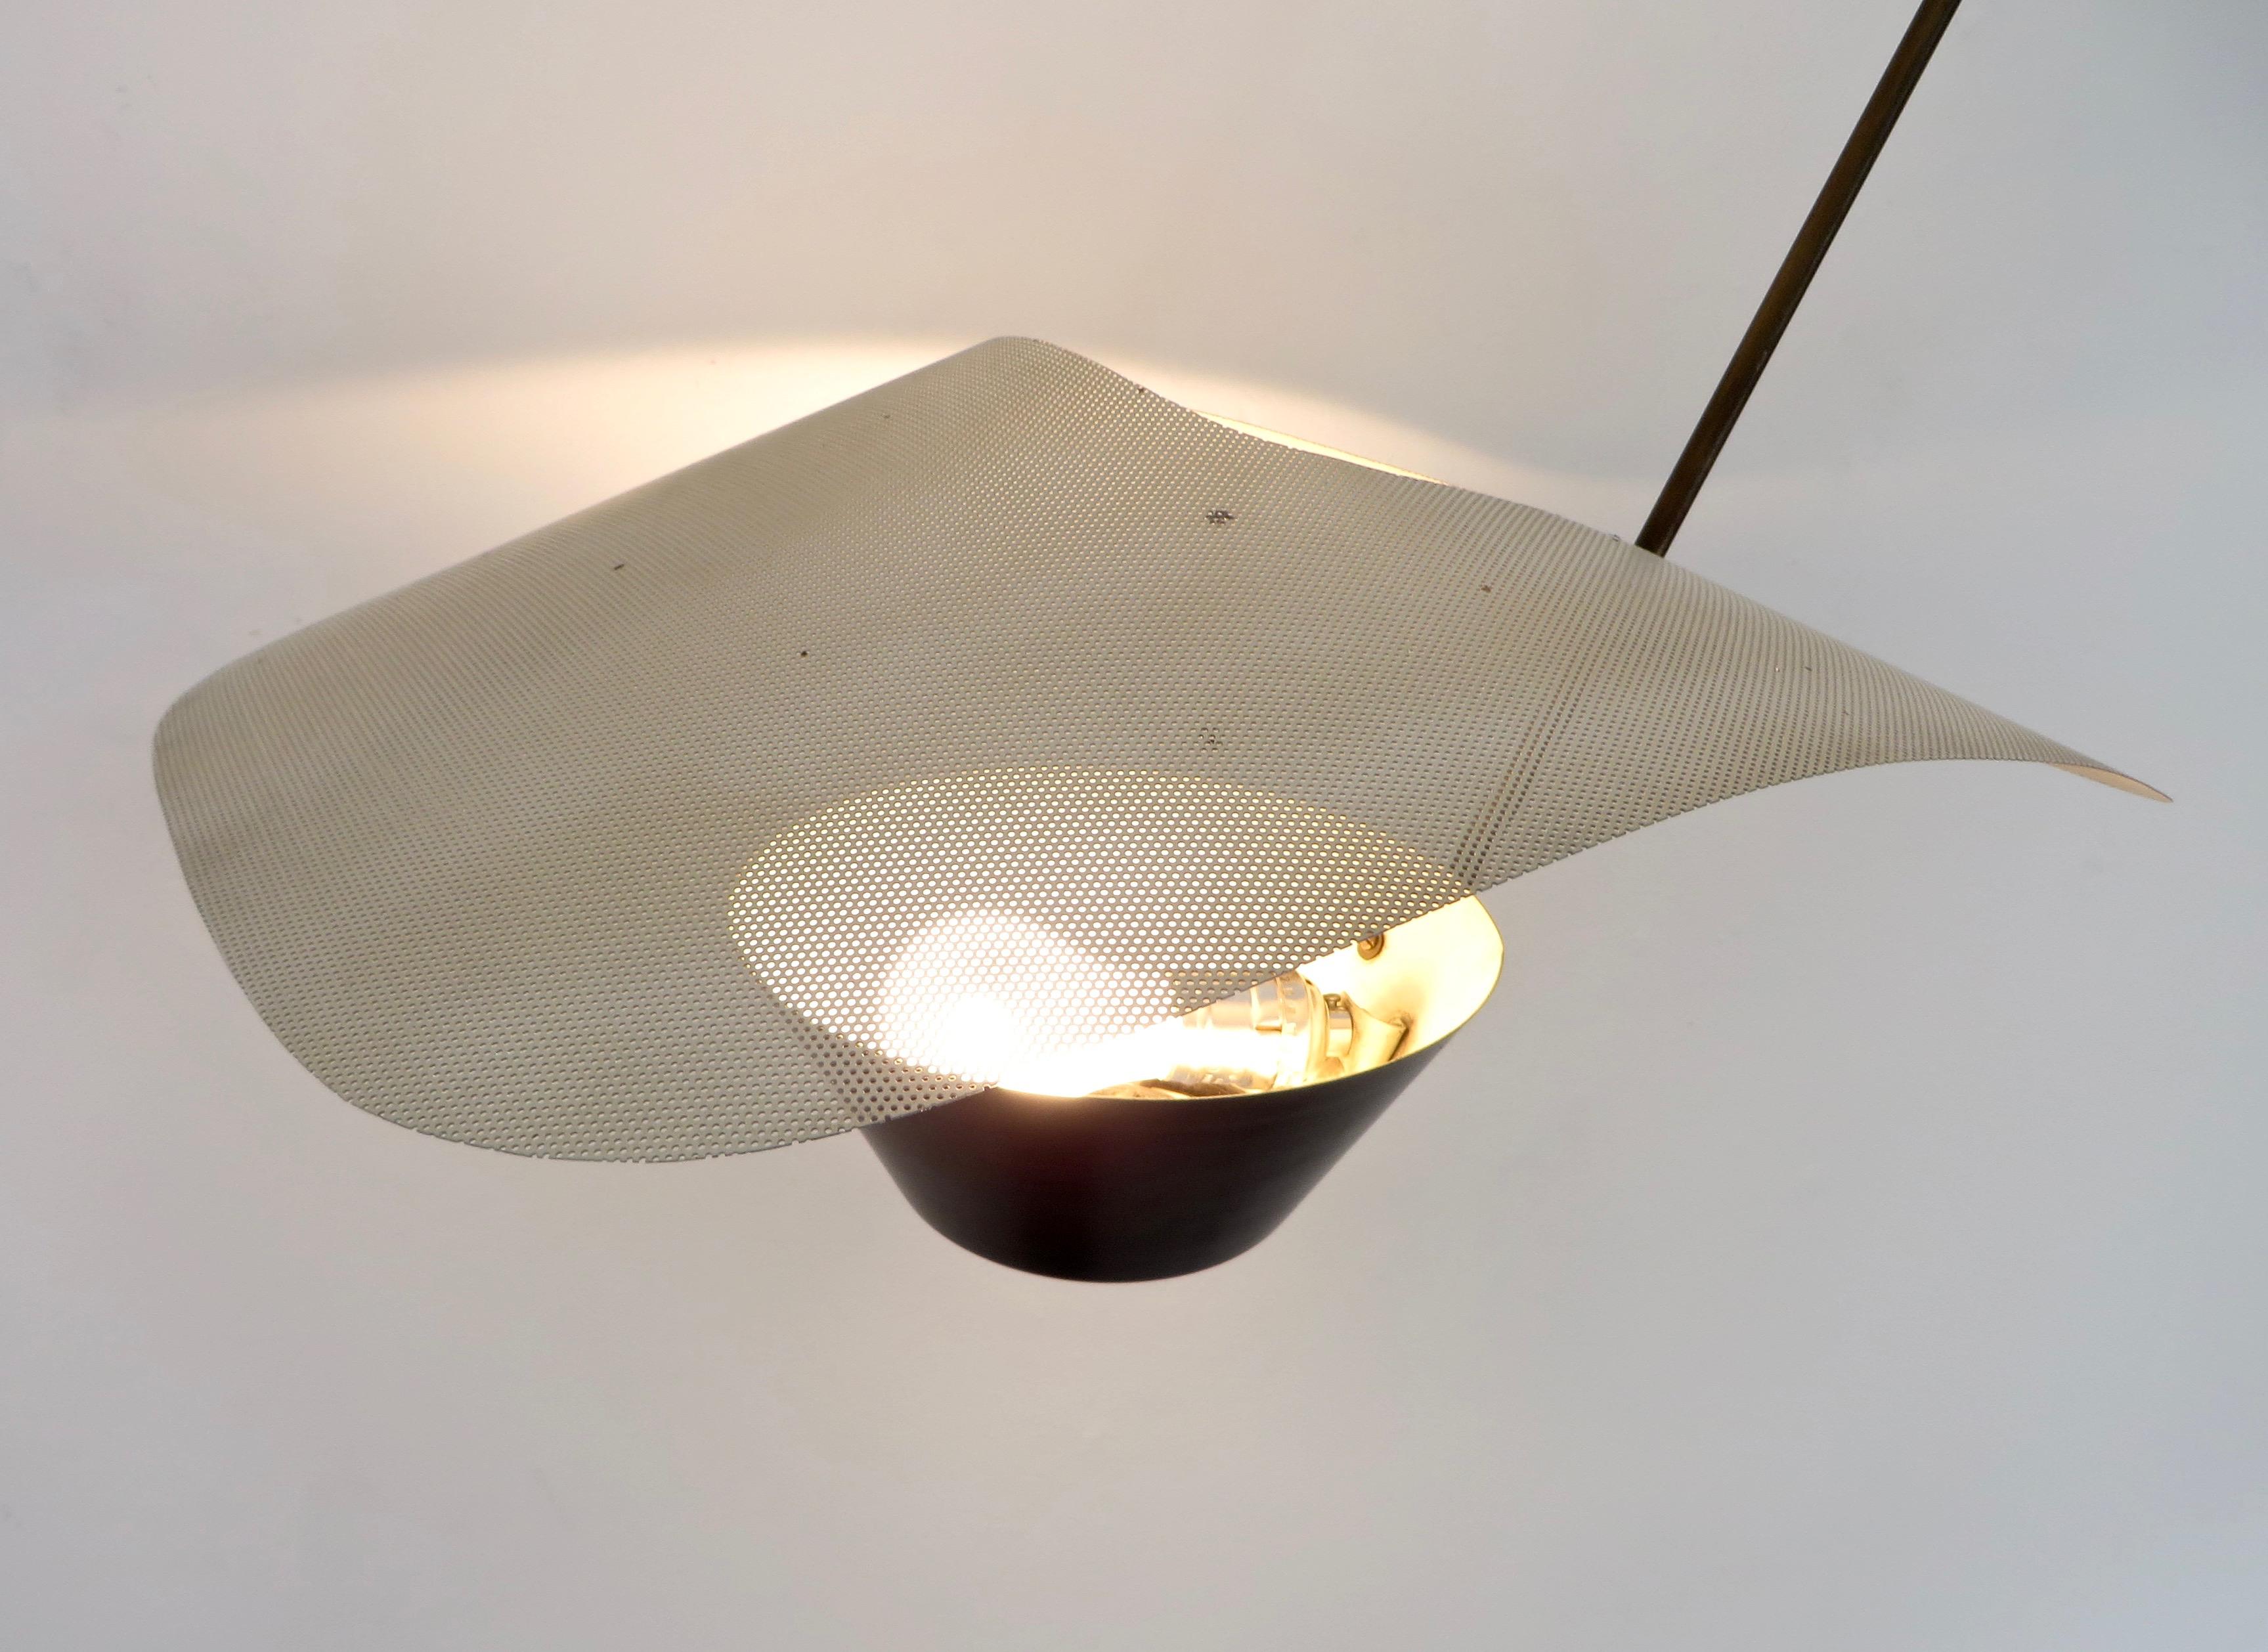 Kite Cerf Volant Applique Wall Light by Pierre Guariche Editioned by Disderot 9